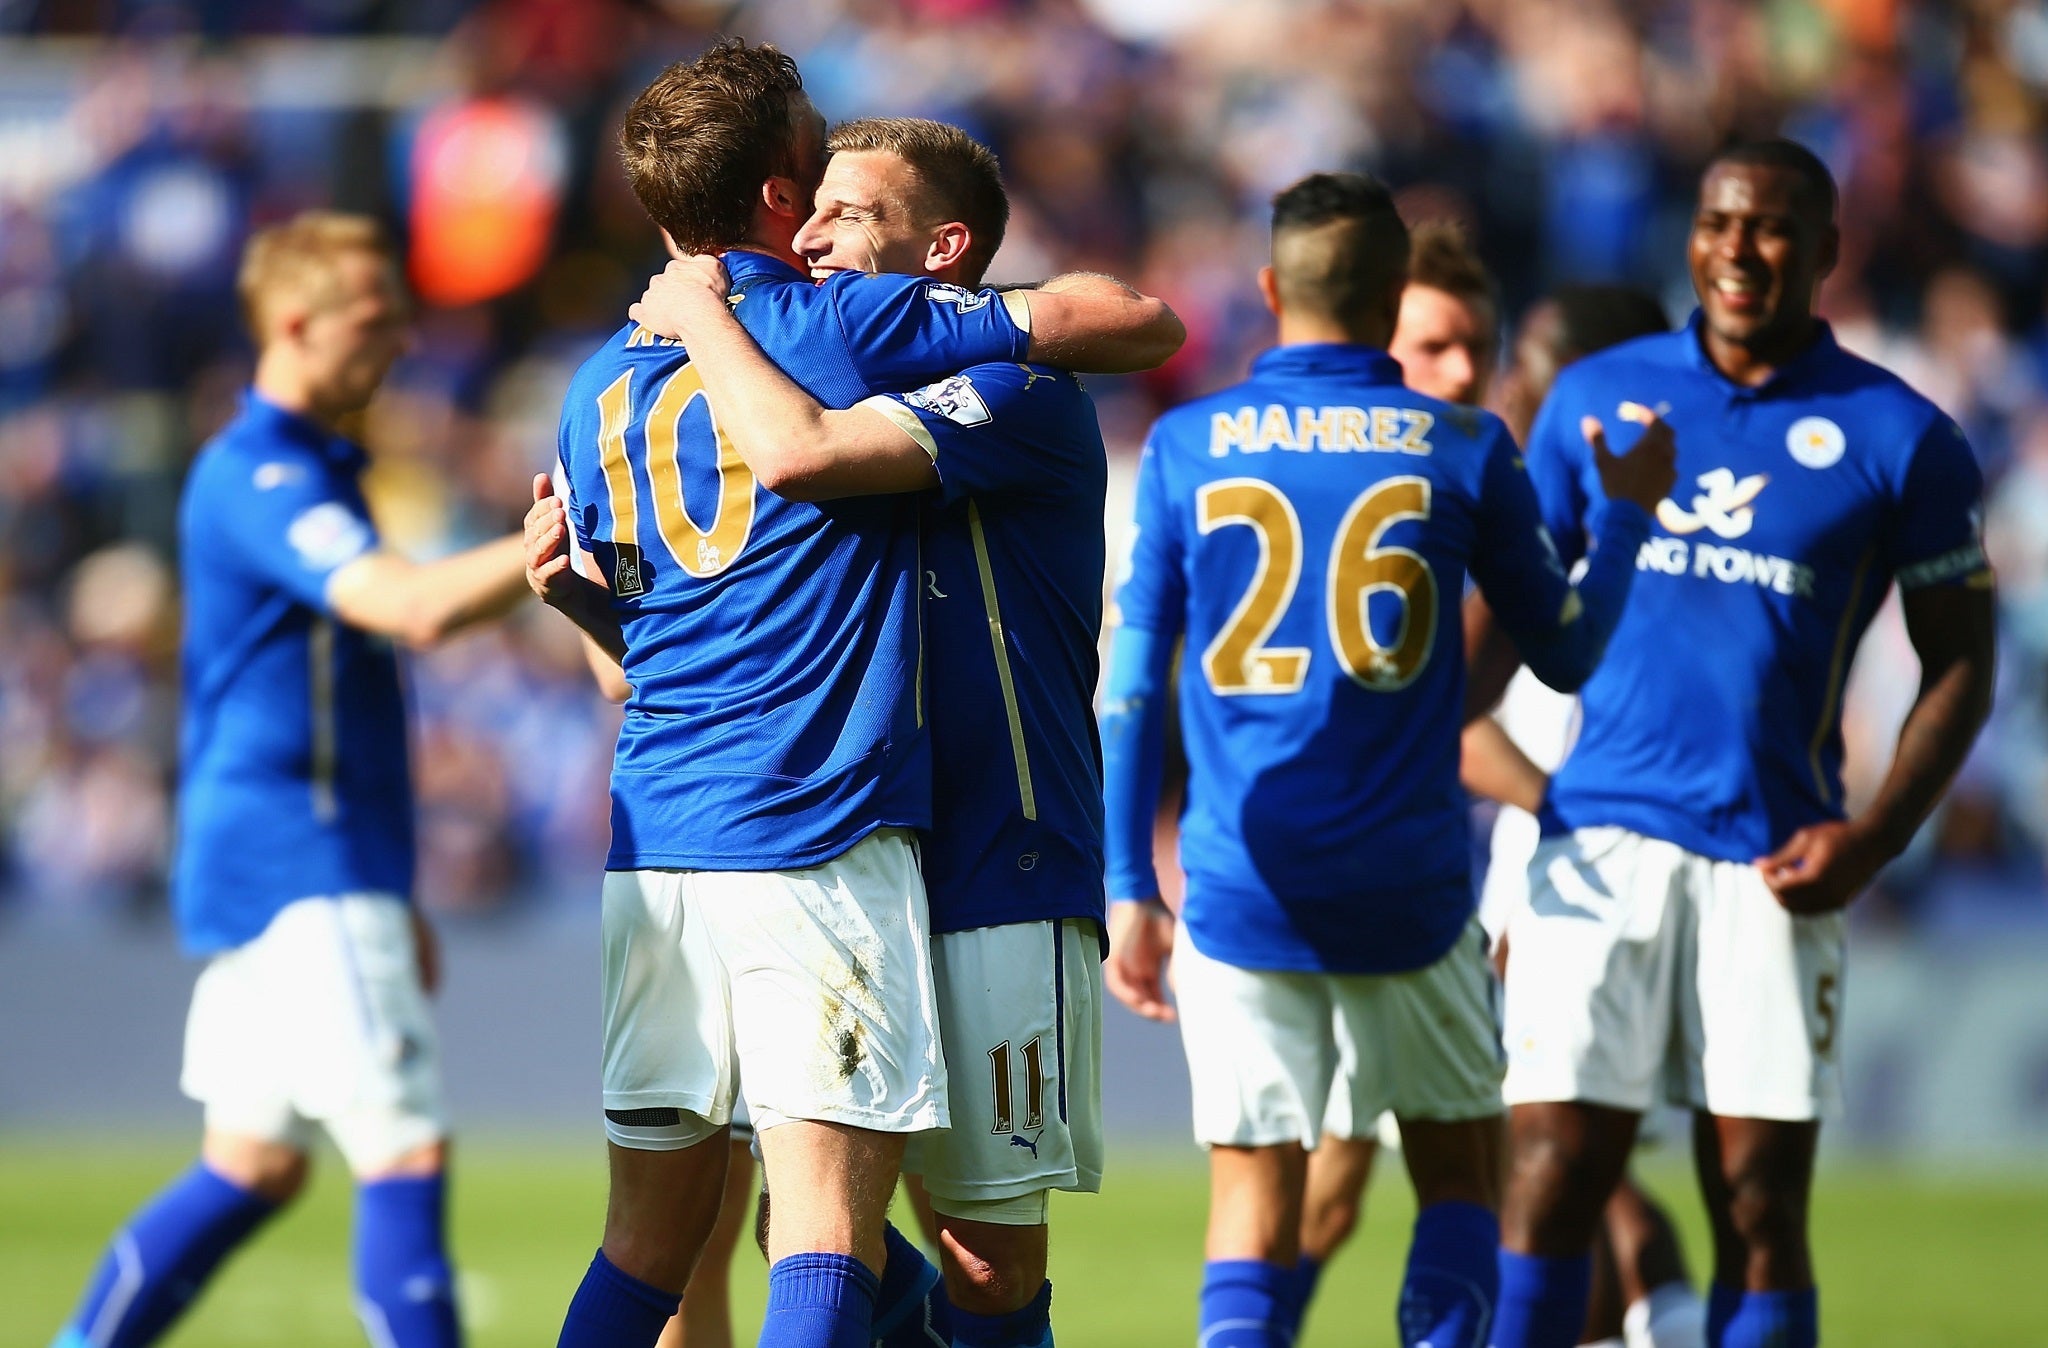 Leicester beat Swansea to climb of the bottom of the Premier League